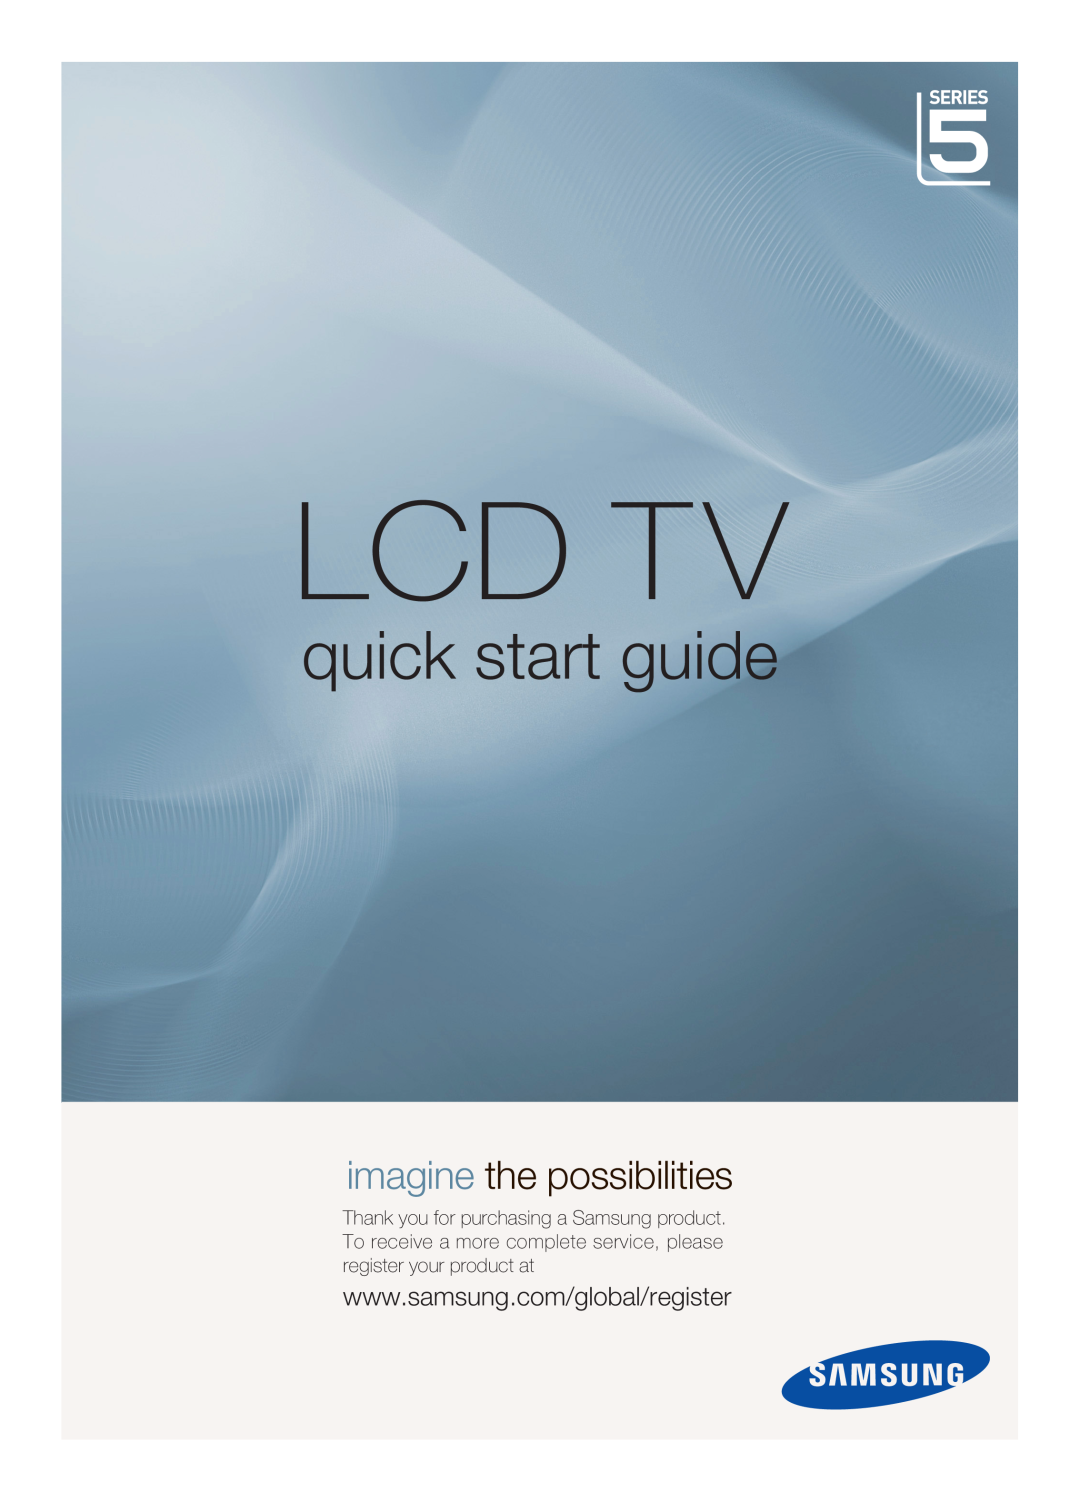 Samsung 5 Series quick start Lcd Tv, quick start guide, imagine the possibilities 